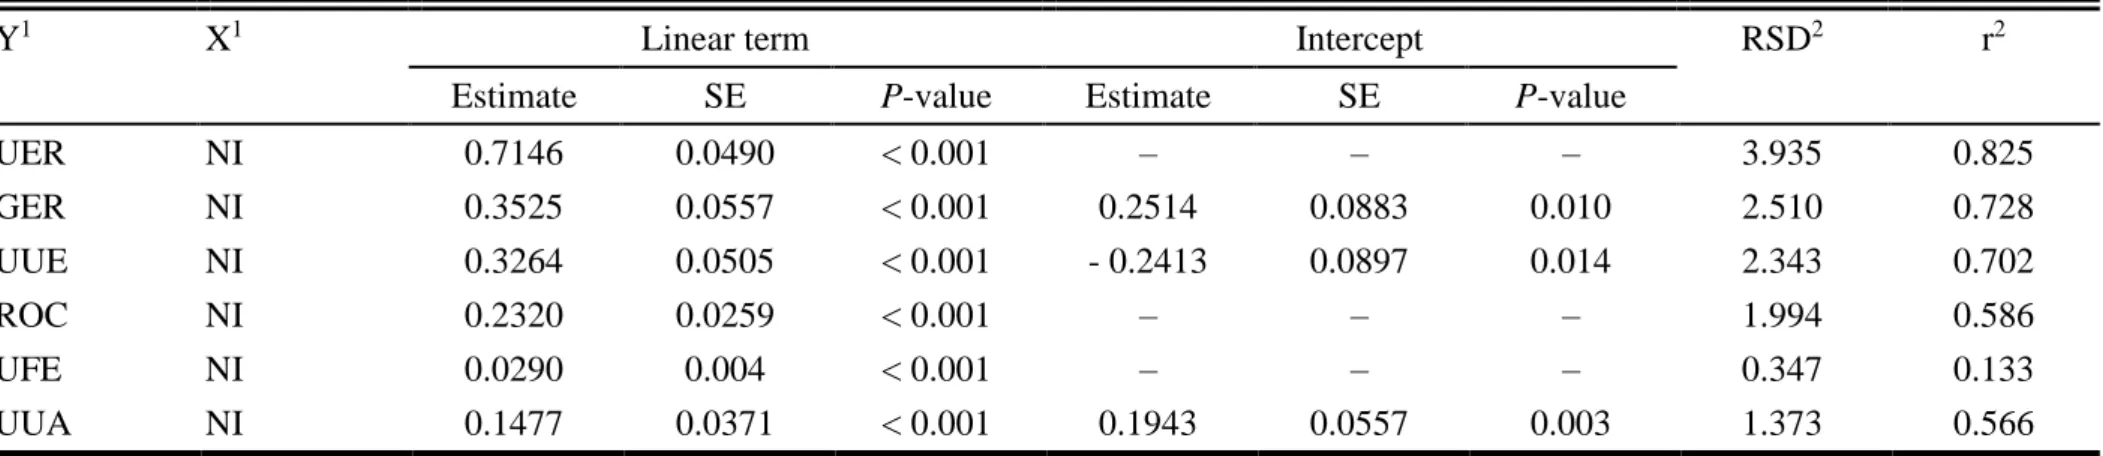 Table 2.2 Summary of the linear models for describing the pattern of urea N entry rate and gastrointestinal entry rate of urea N and urea kinetics 